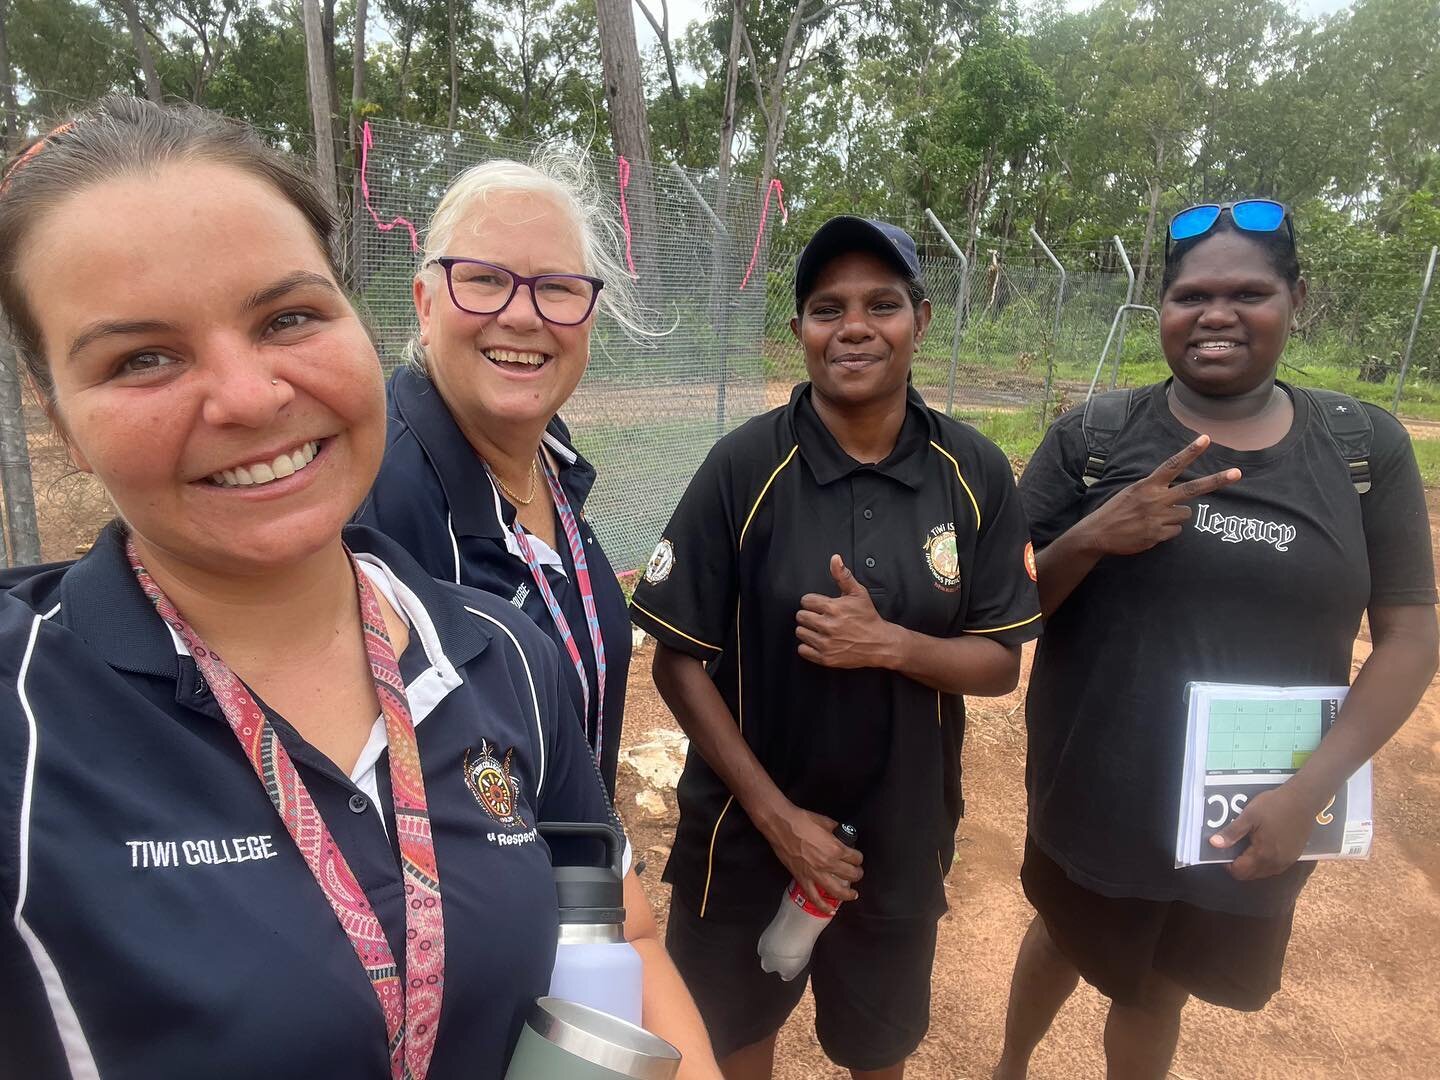 A big shout out of gratitude to Marbine of the Tiwi Rangers who stopped to &lsquo;rescue&rsquo; us last week from a looong walk into Mili after our vehicle had died! We were hosted at the Ranger station where we could call Tiwi College staff to do th